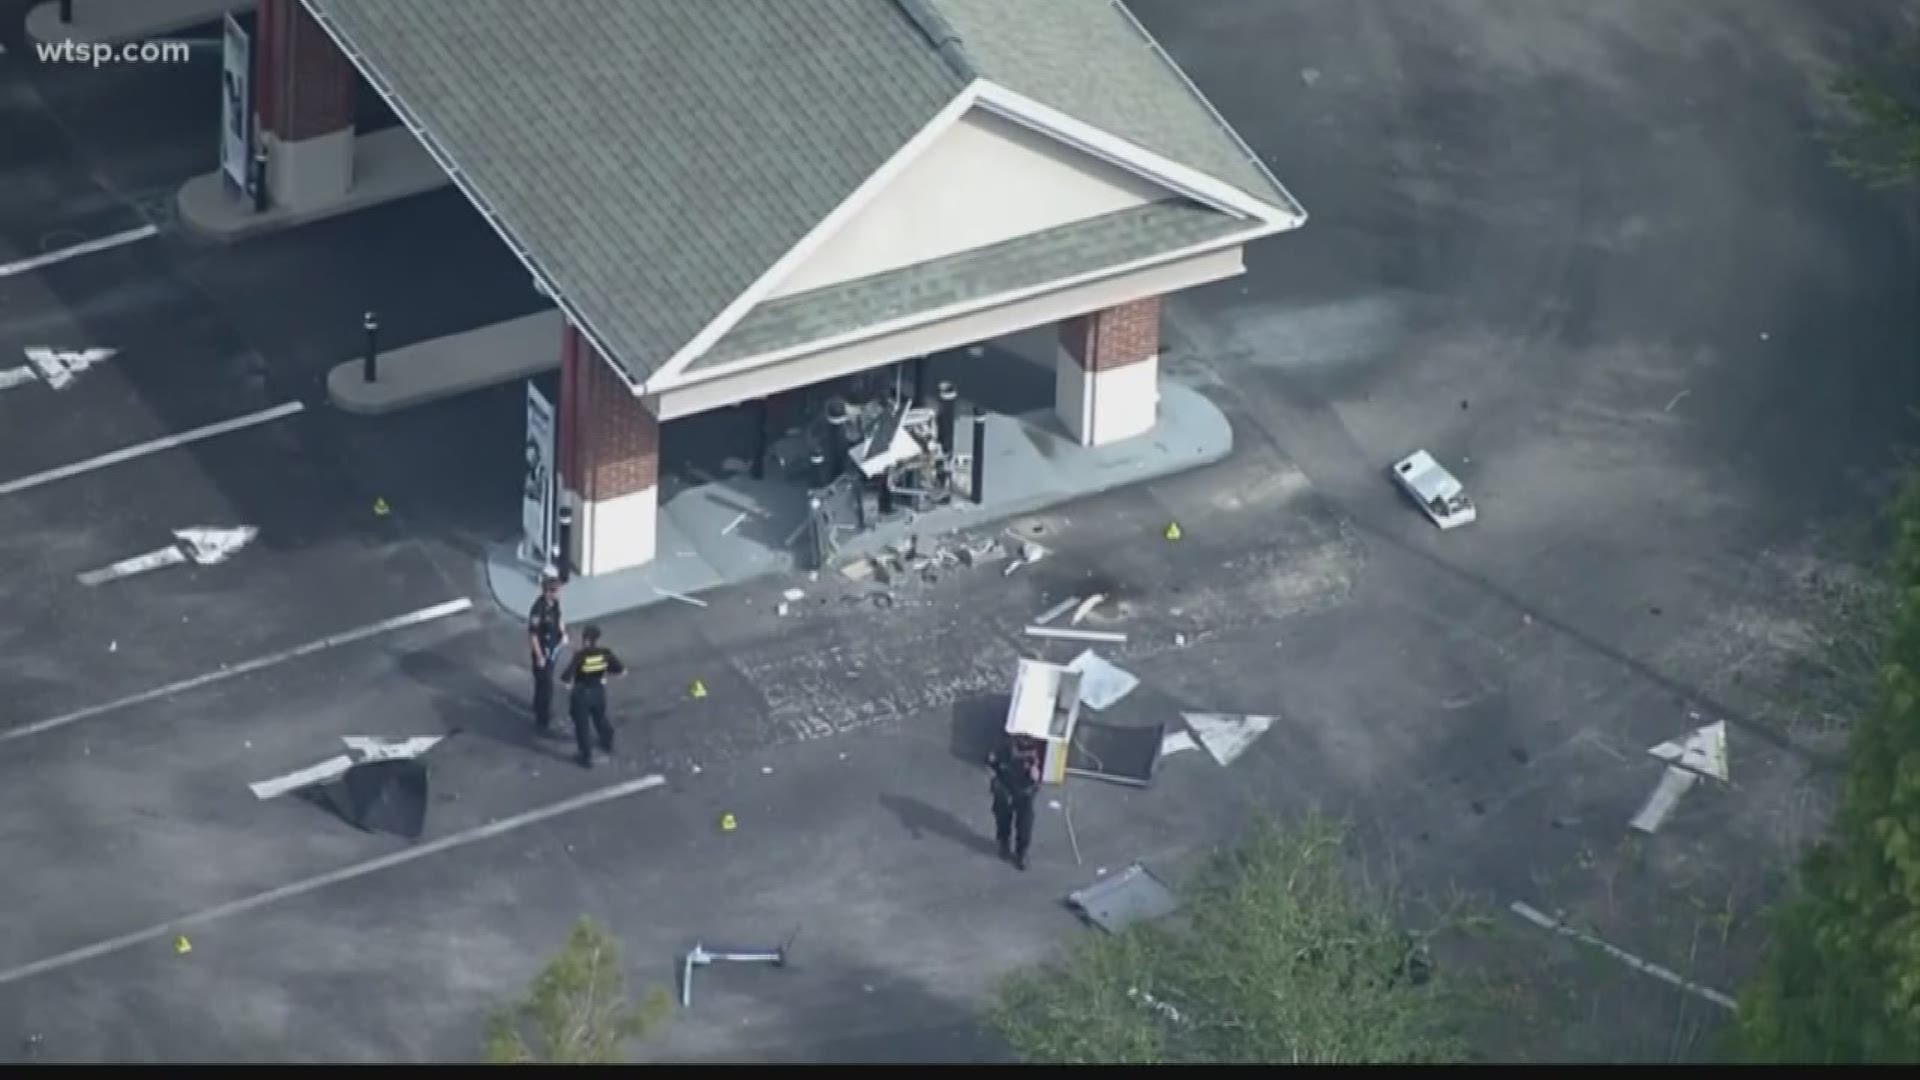 A drive-thru ATM exploded early Monday morning in Pinellas County.